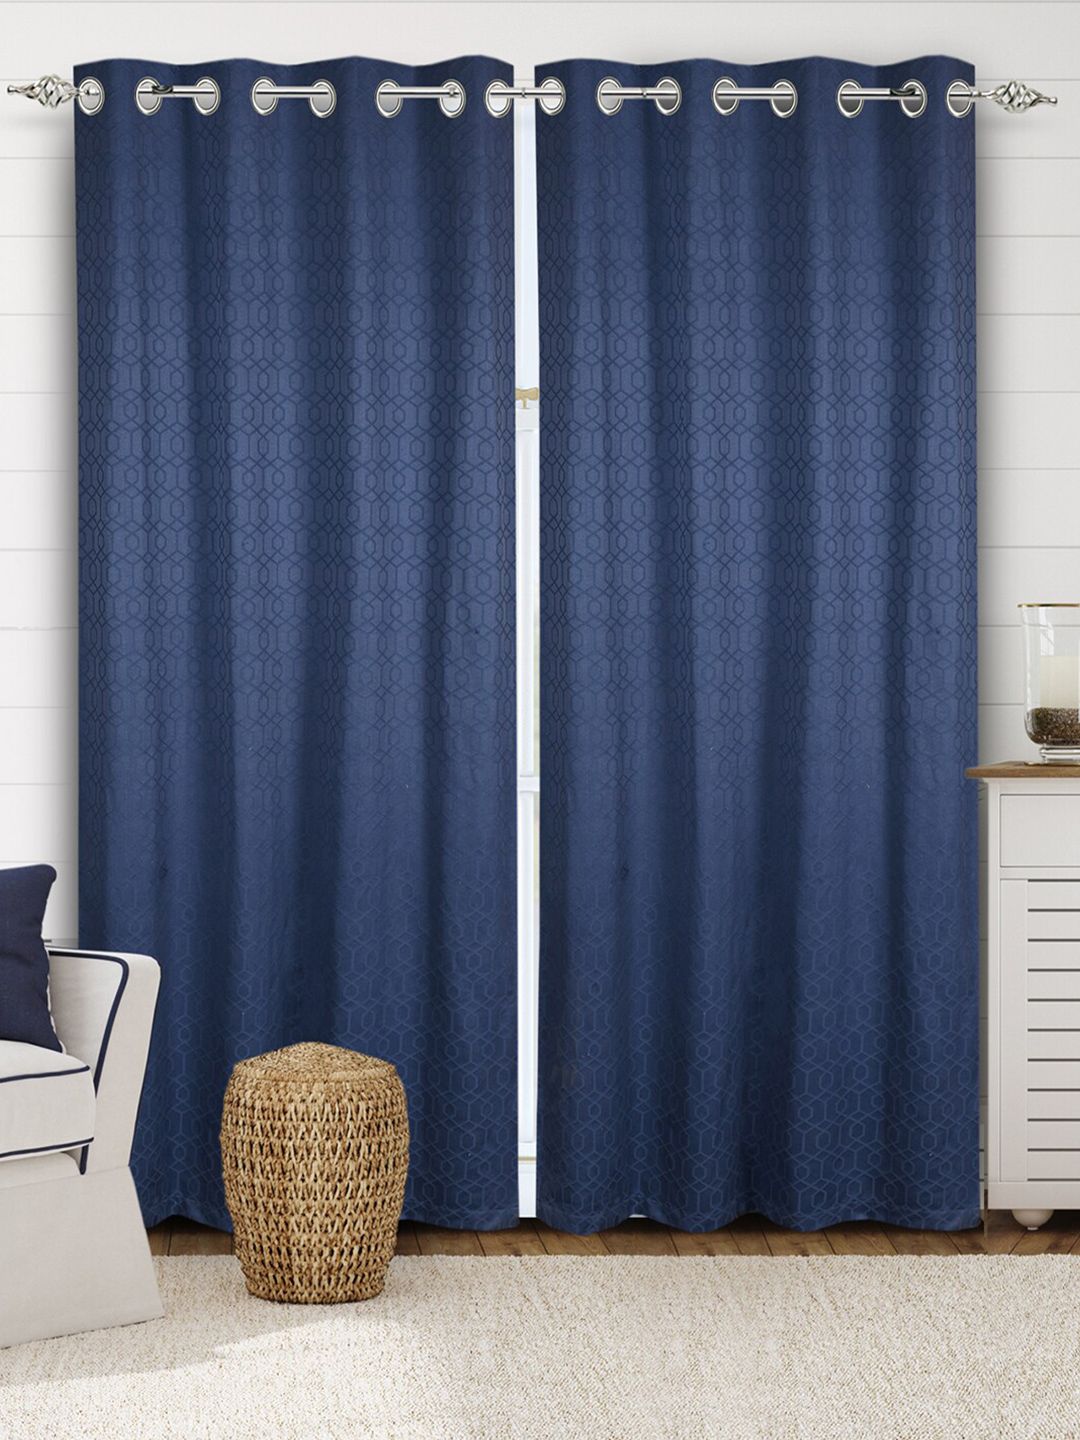 Saral Home Blue Set of 2 Black Out Long Door Curtain Price in India